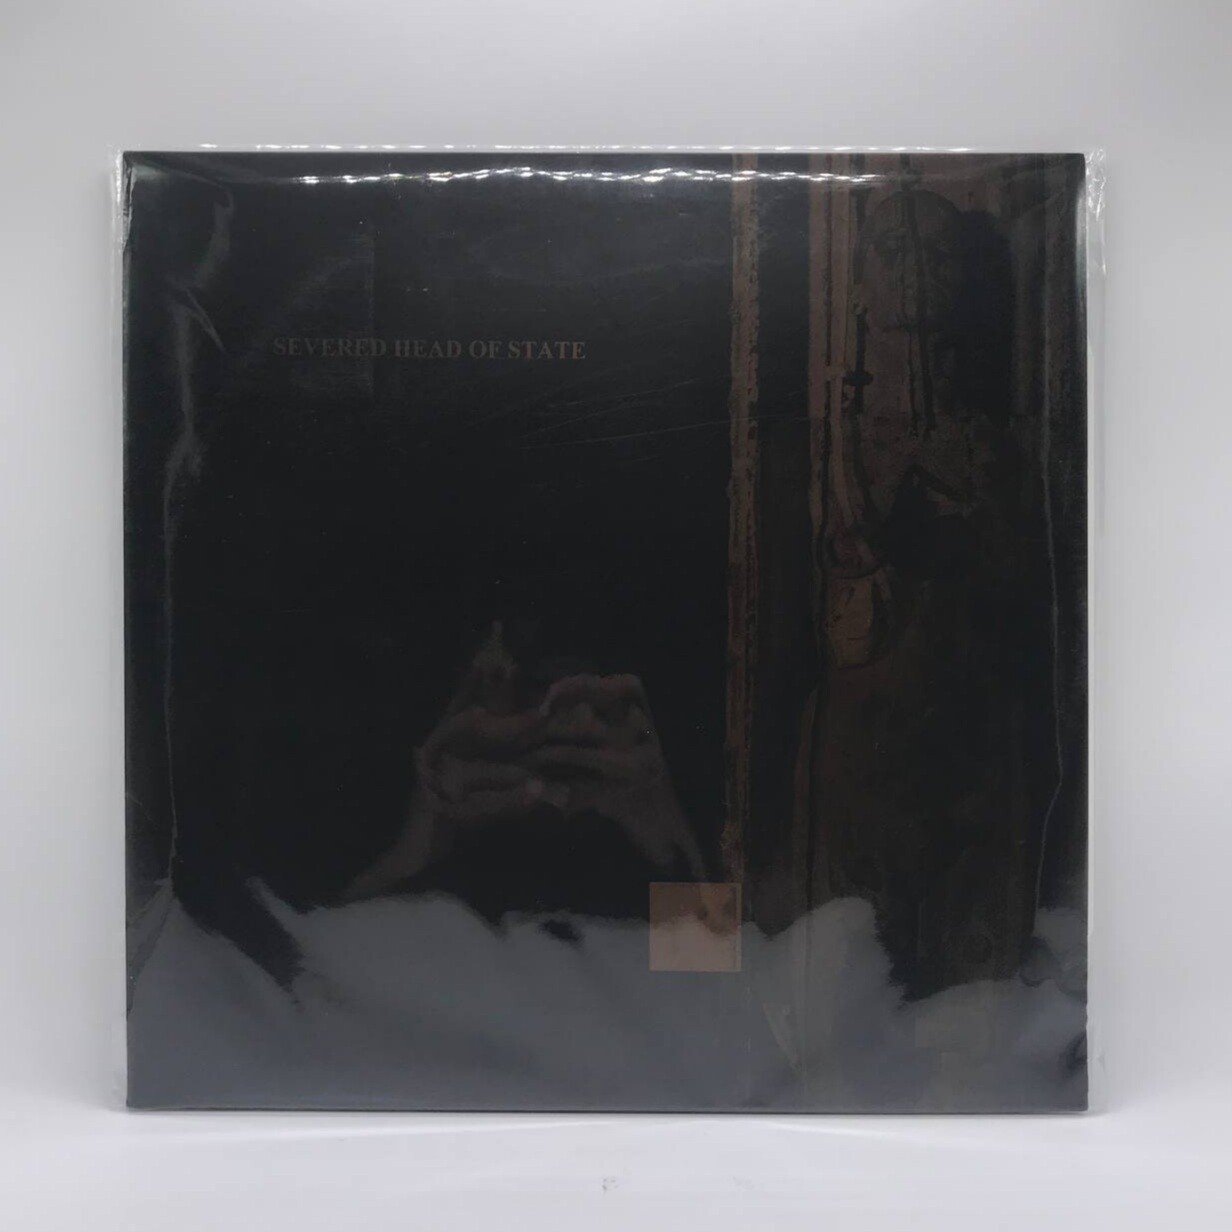 [USED] SEVERED HEAD OF STATE -LP